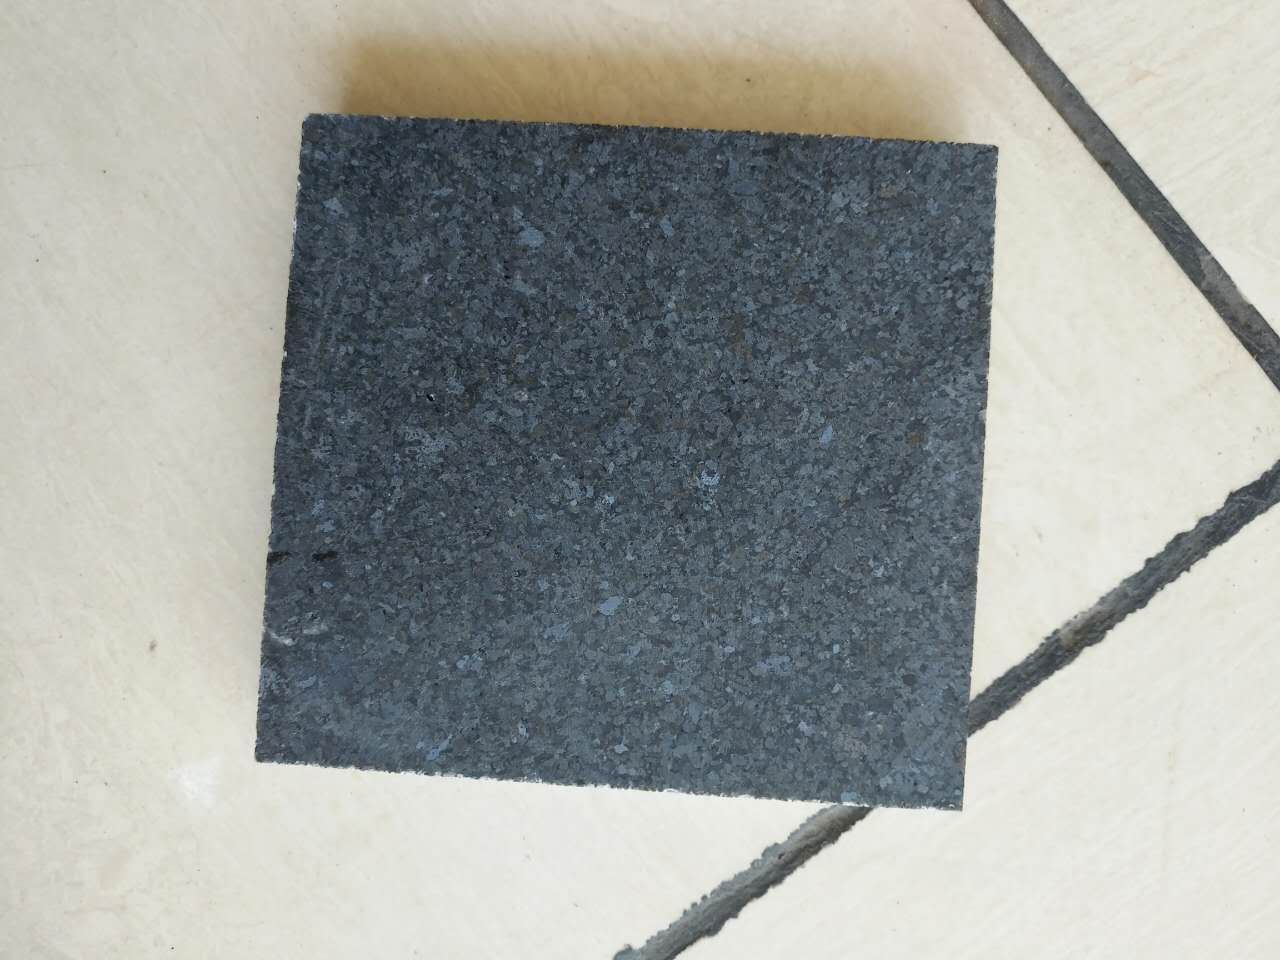 Chinese New Shanxi Black Granite Tiles with honed surface